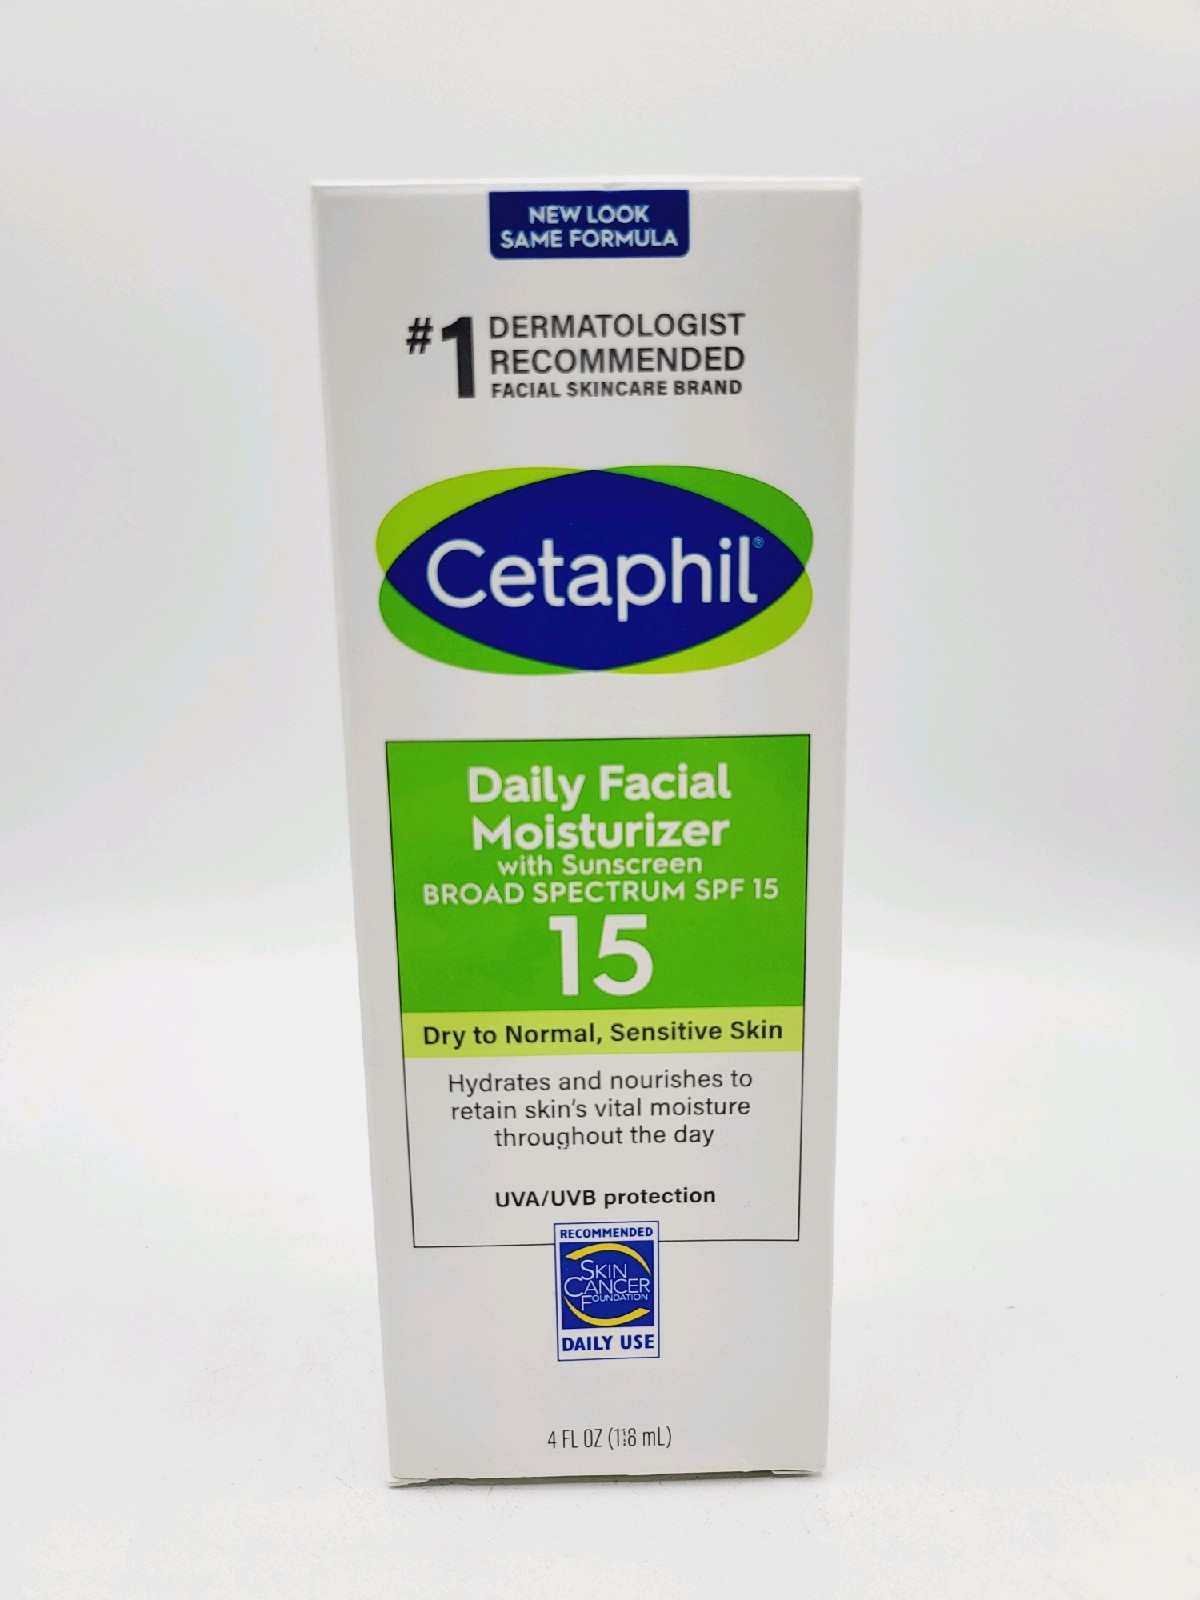 Cetaphil Daily Facial Moisturizer With Sunscreen, Fragrance Free, Broad Spectrum SPF 15 4 fl oz